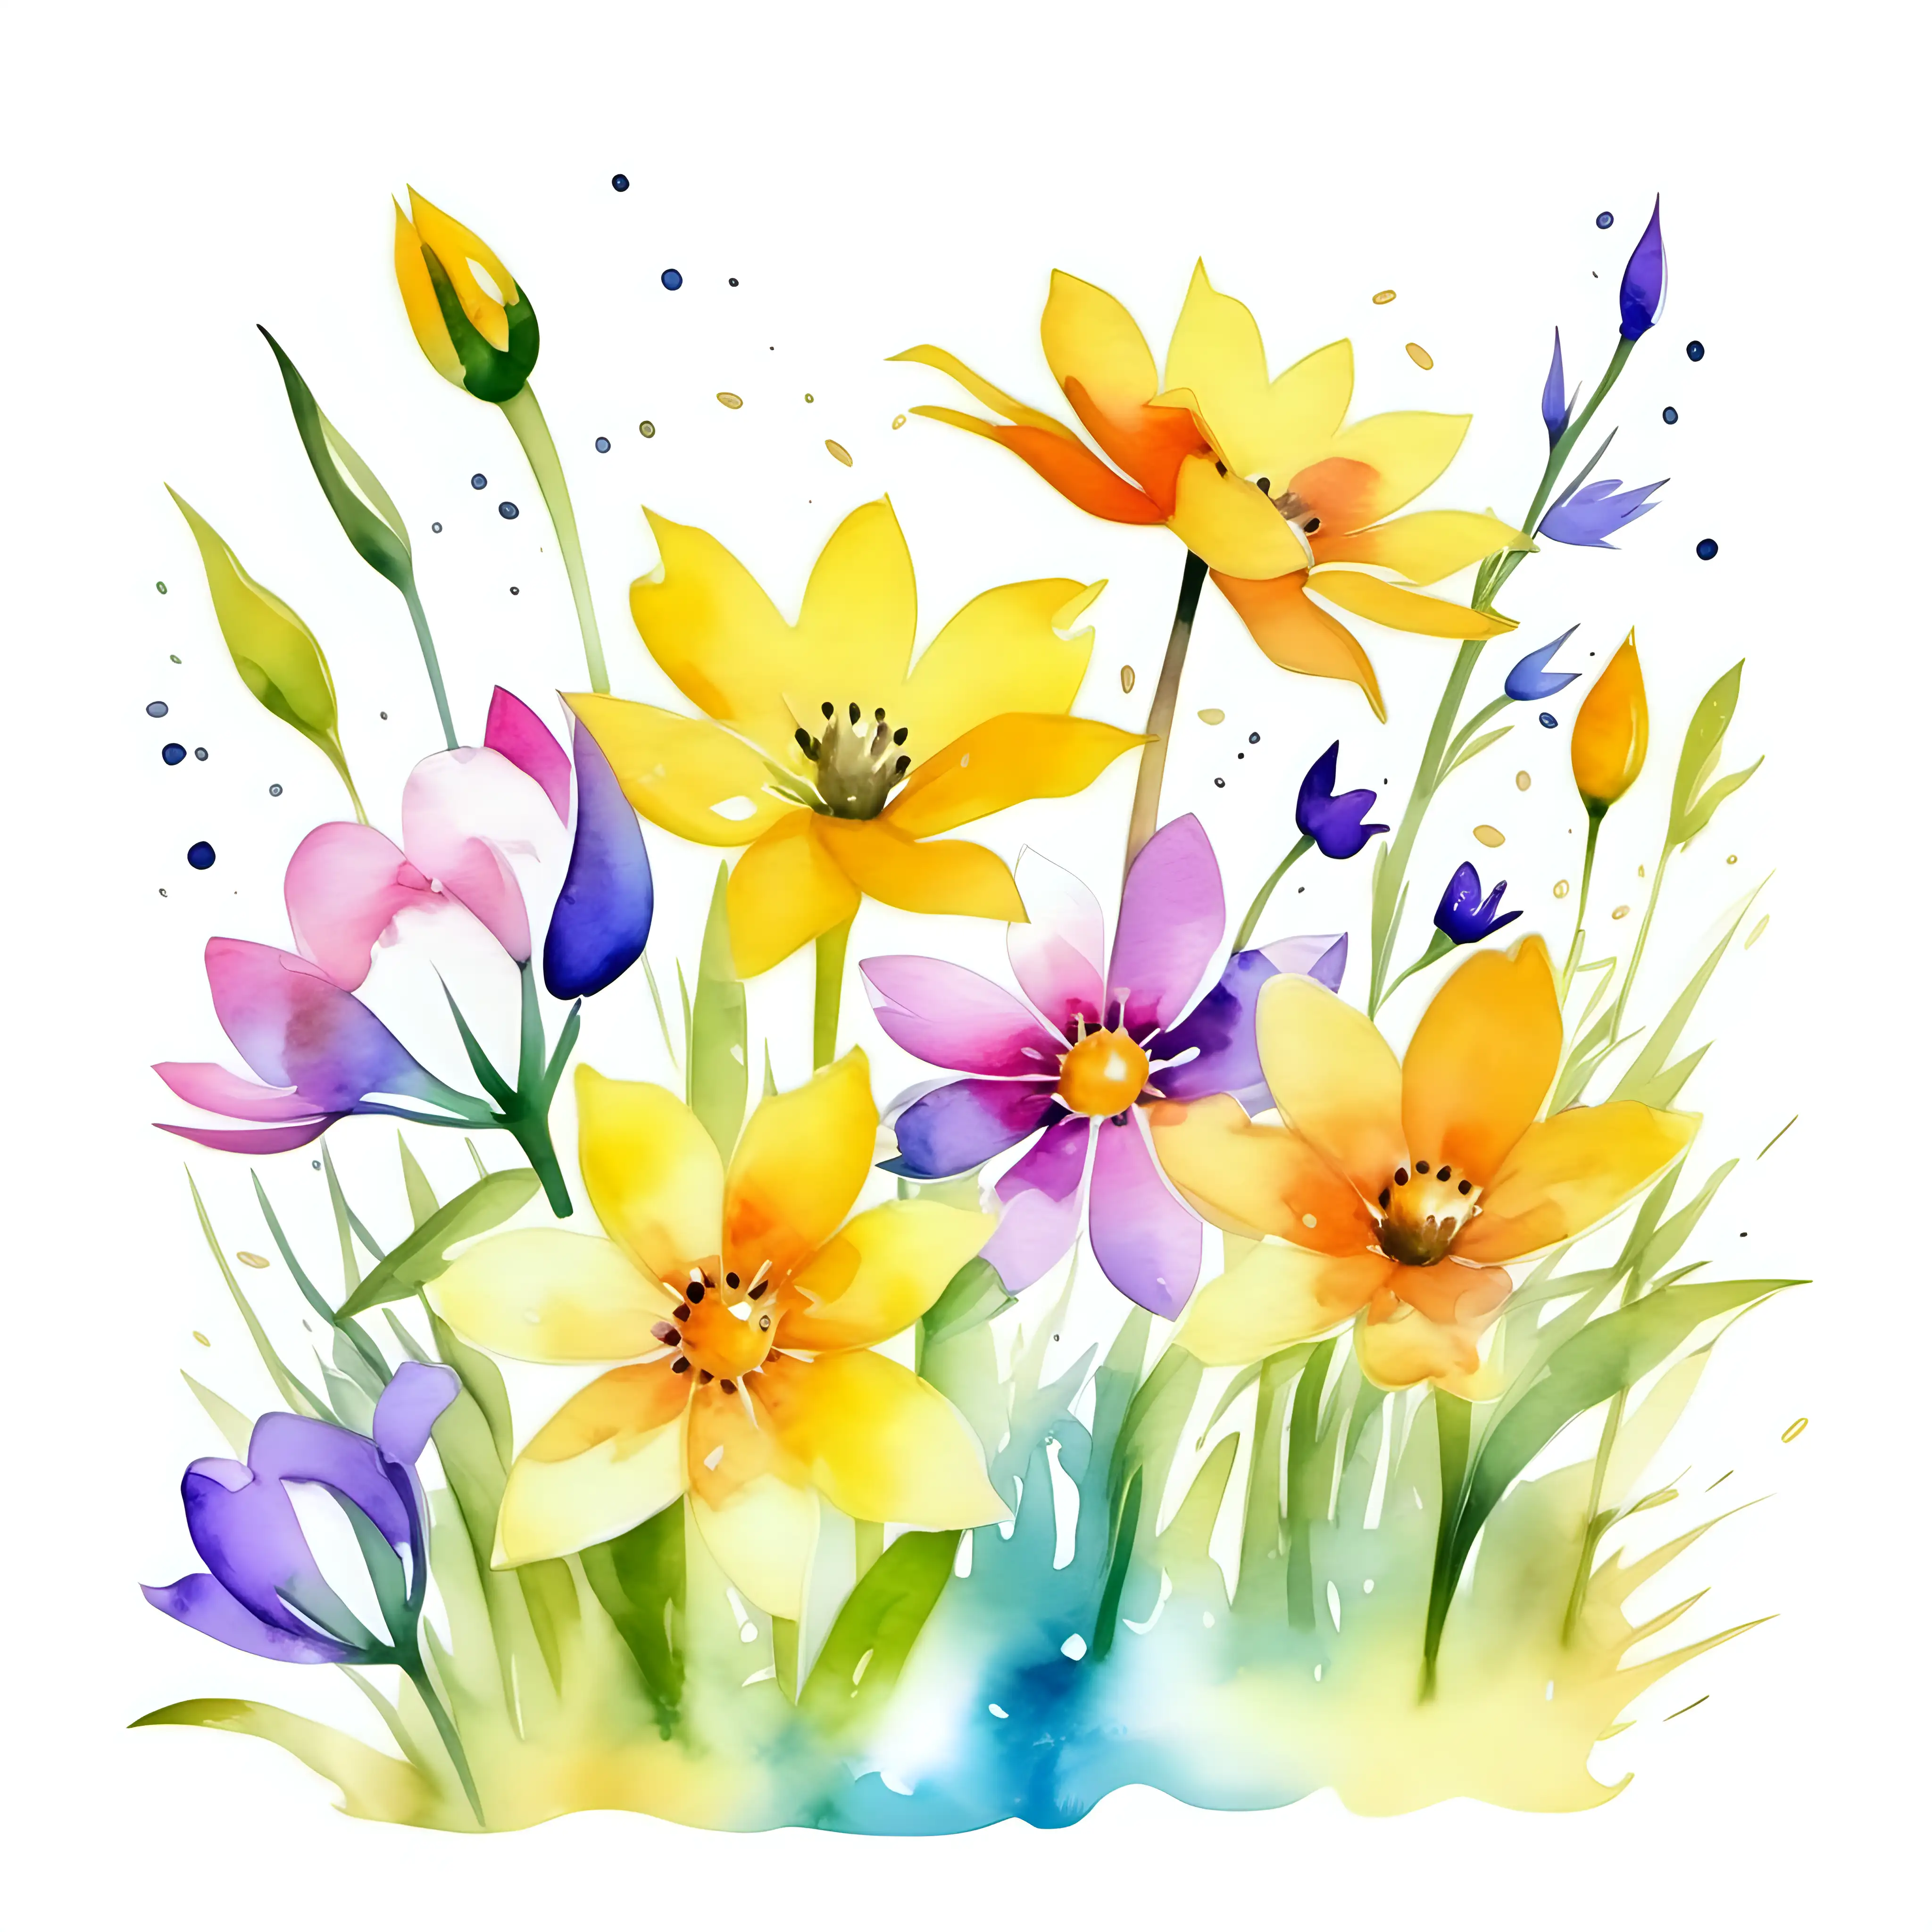 Vibrant Spring Flowers in Sunshine Beautiful Watercolor Art on a White Background